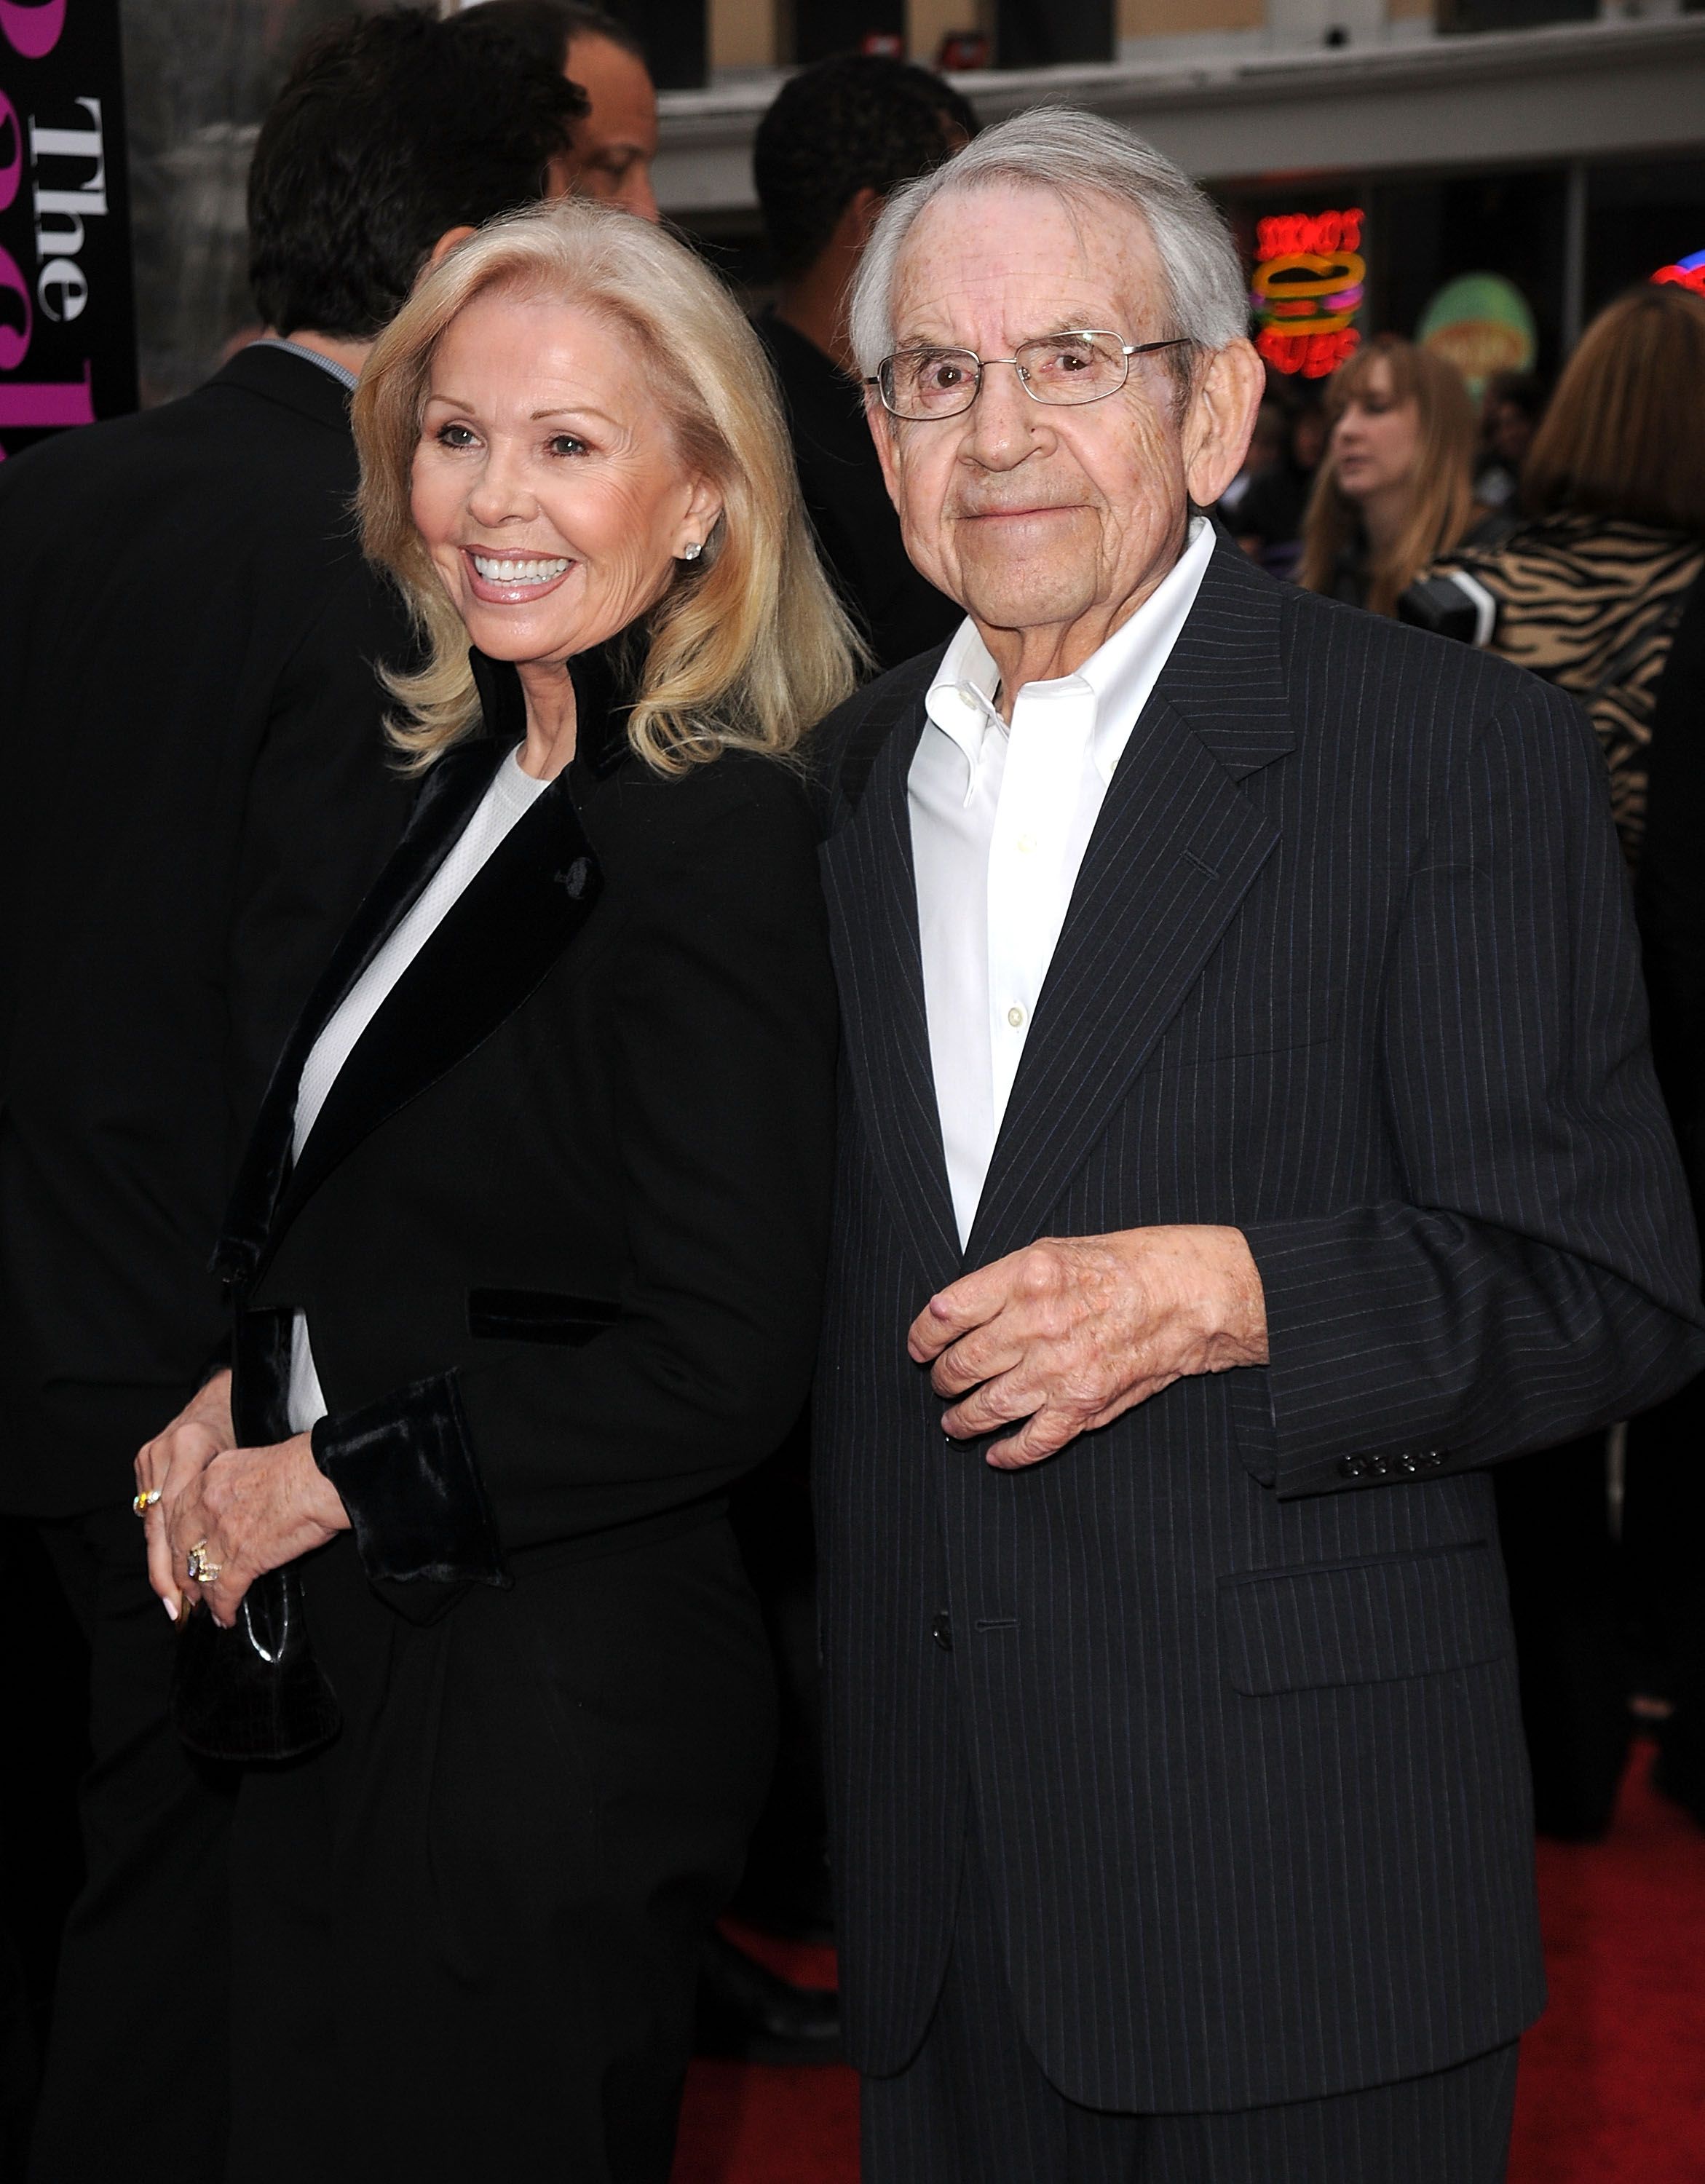 Tom Bosley and Patricia Carr arrive at the premiere of CBS Films' 'The Back-Up Plan' held at the Regency Village Theatre on April 21, 2010 in Westwood, California. | Source: Getty Images